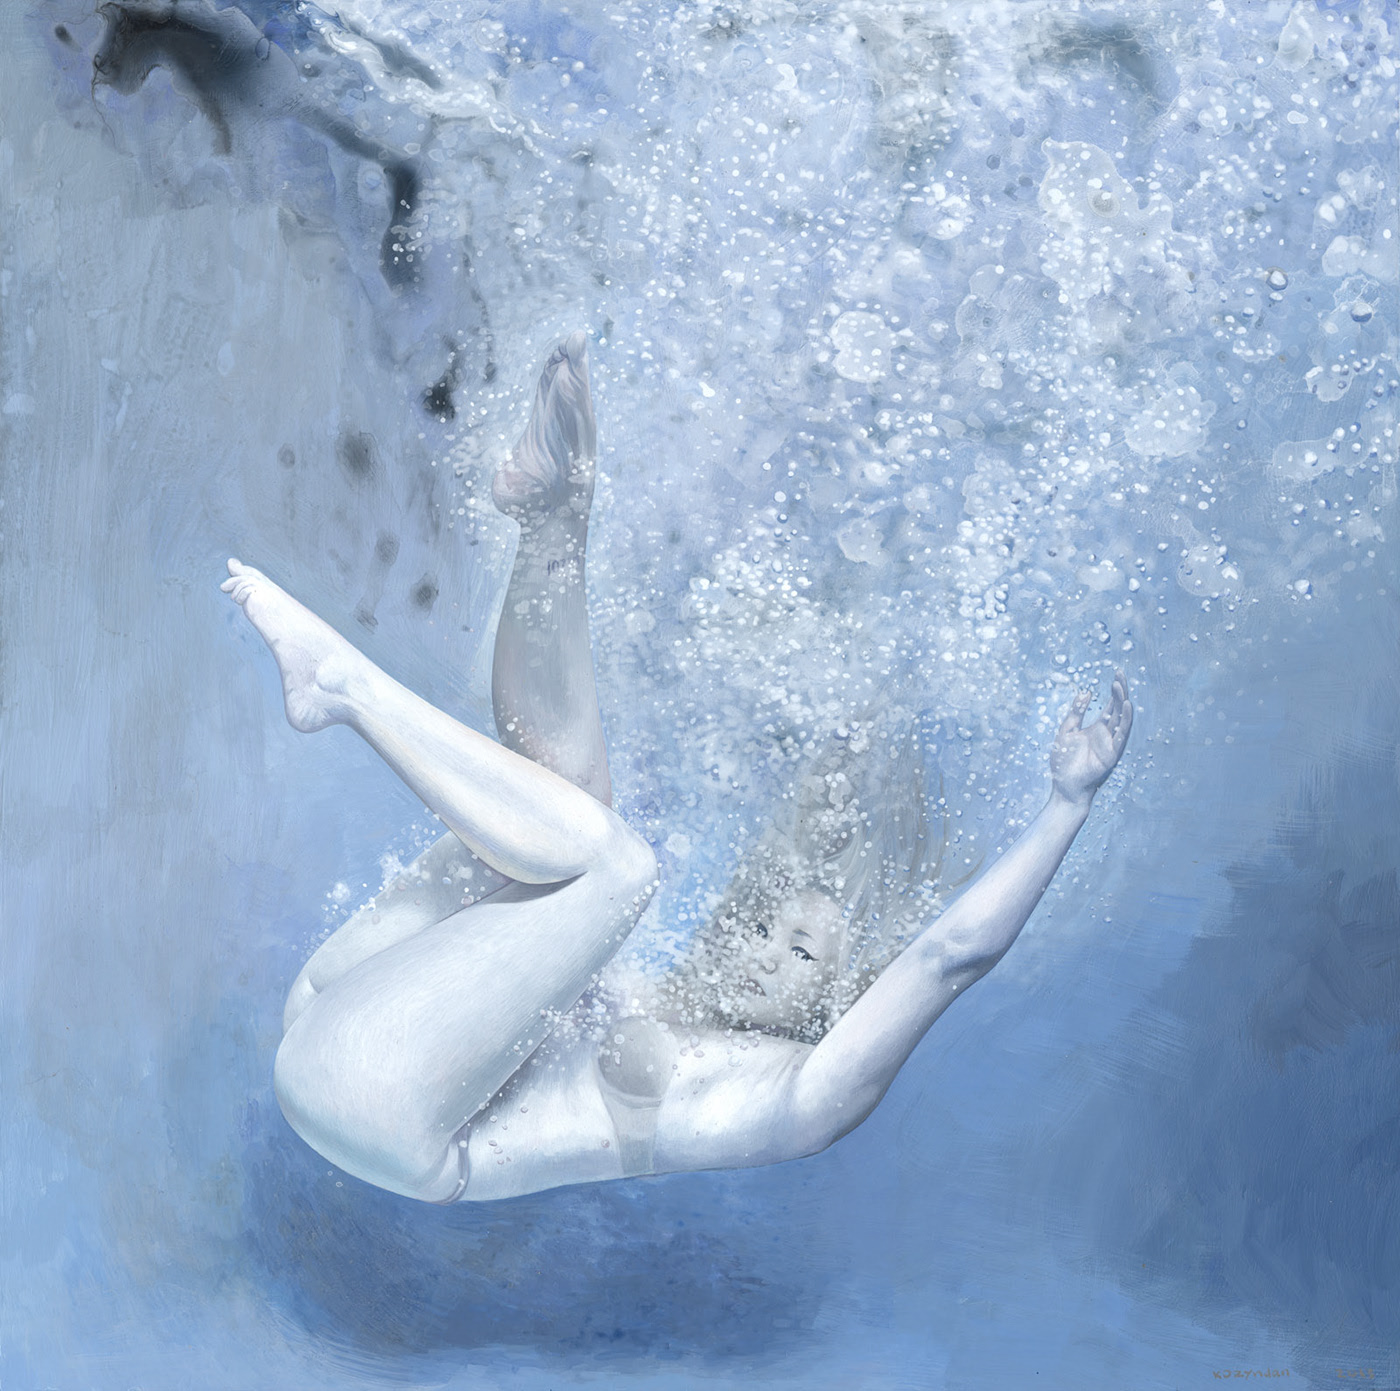 Paintings From Below the Surface... on Behance